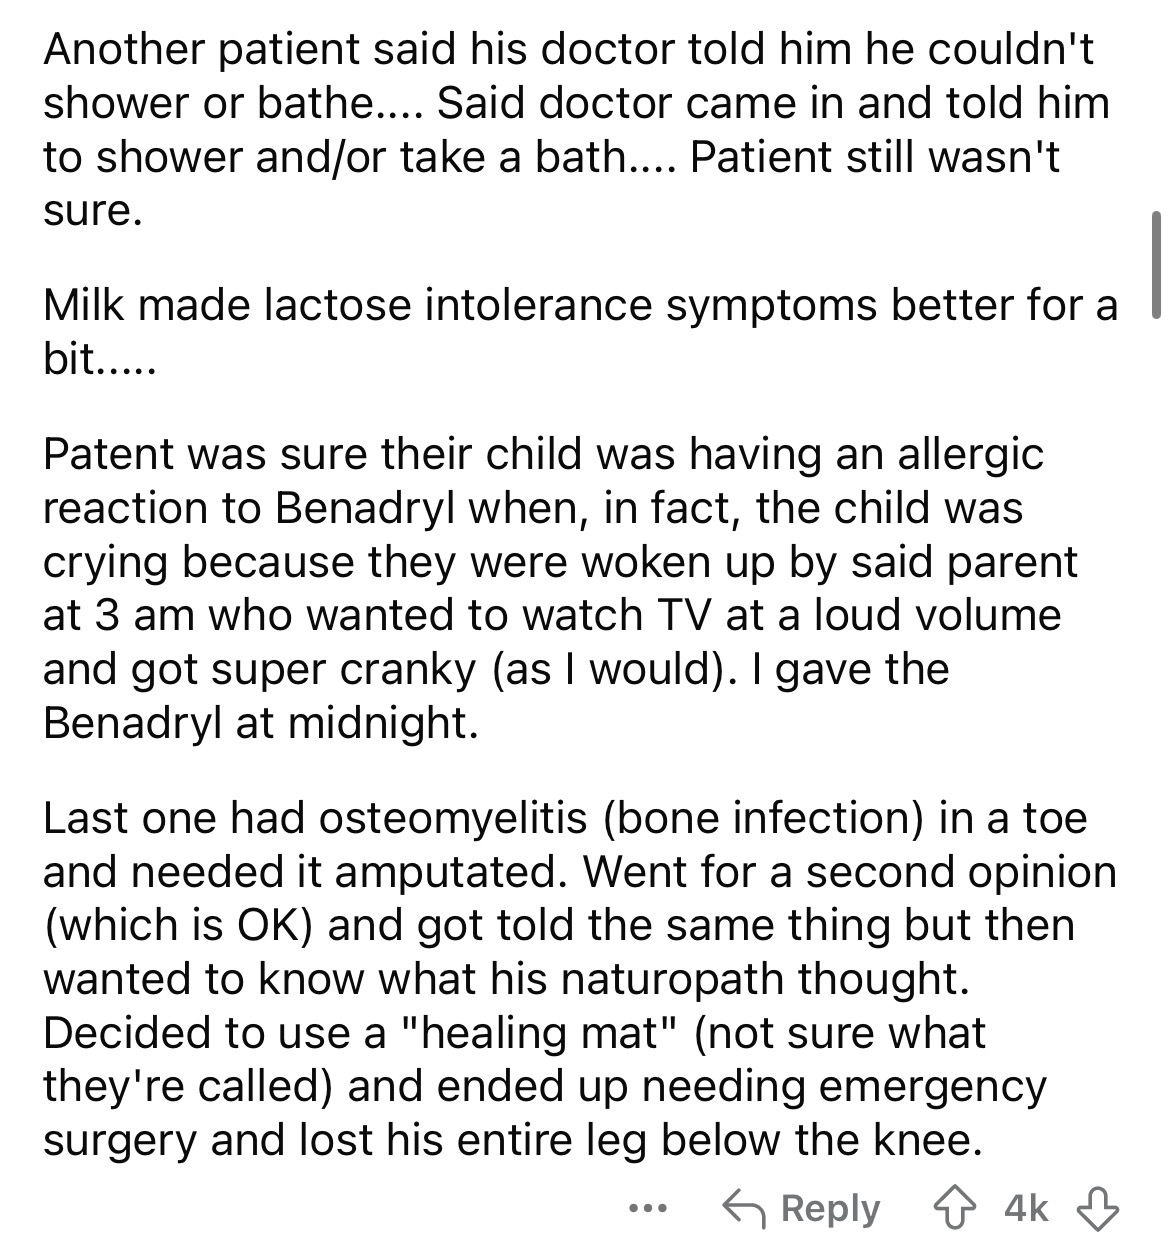 document - Another patient said his doctor told him he couldn't shower or bathe.... Said doctor came in and told him to shower andor take a bath.... Patient still wasn't sure. Milk made lactose intolerance symptoms better for a bit..... Patent was sure th